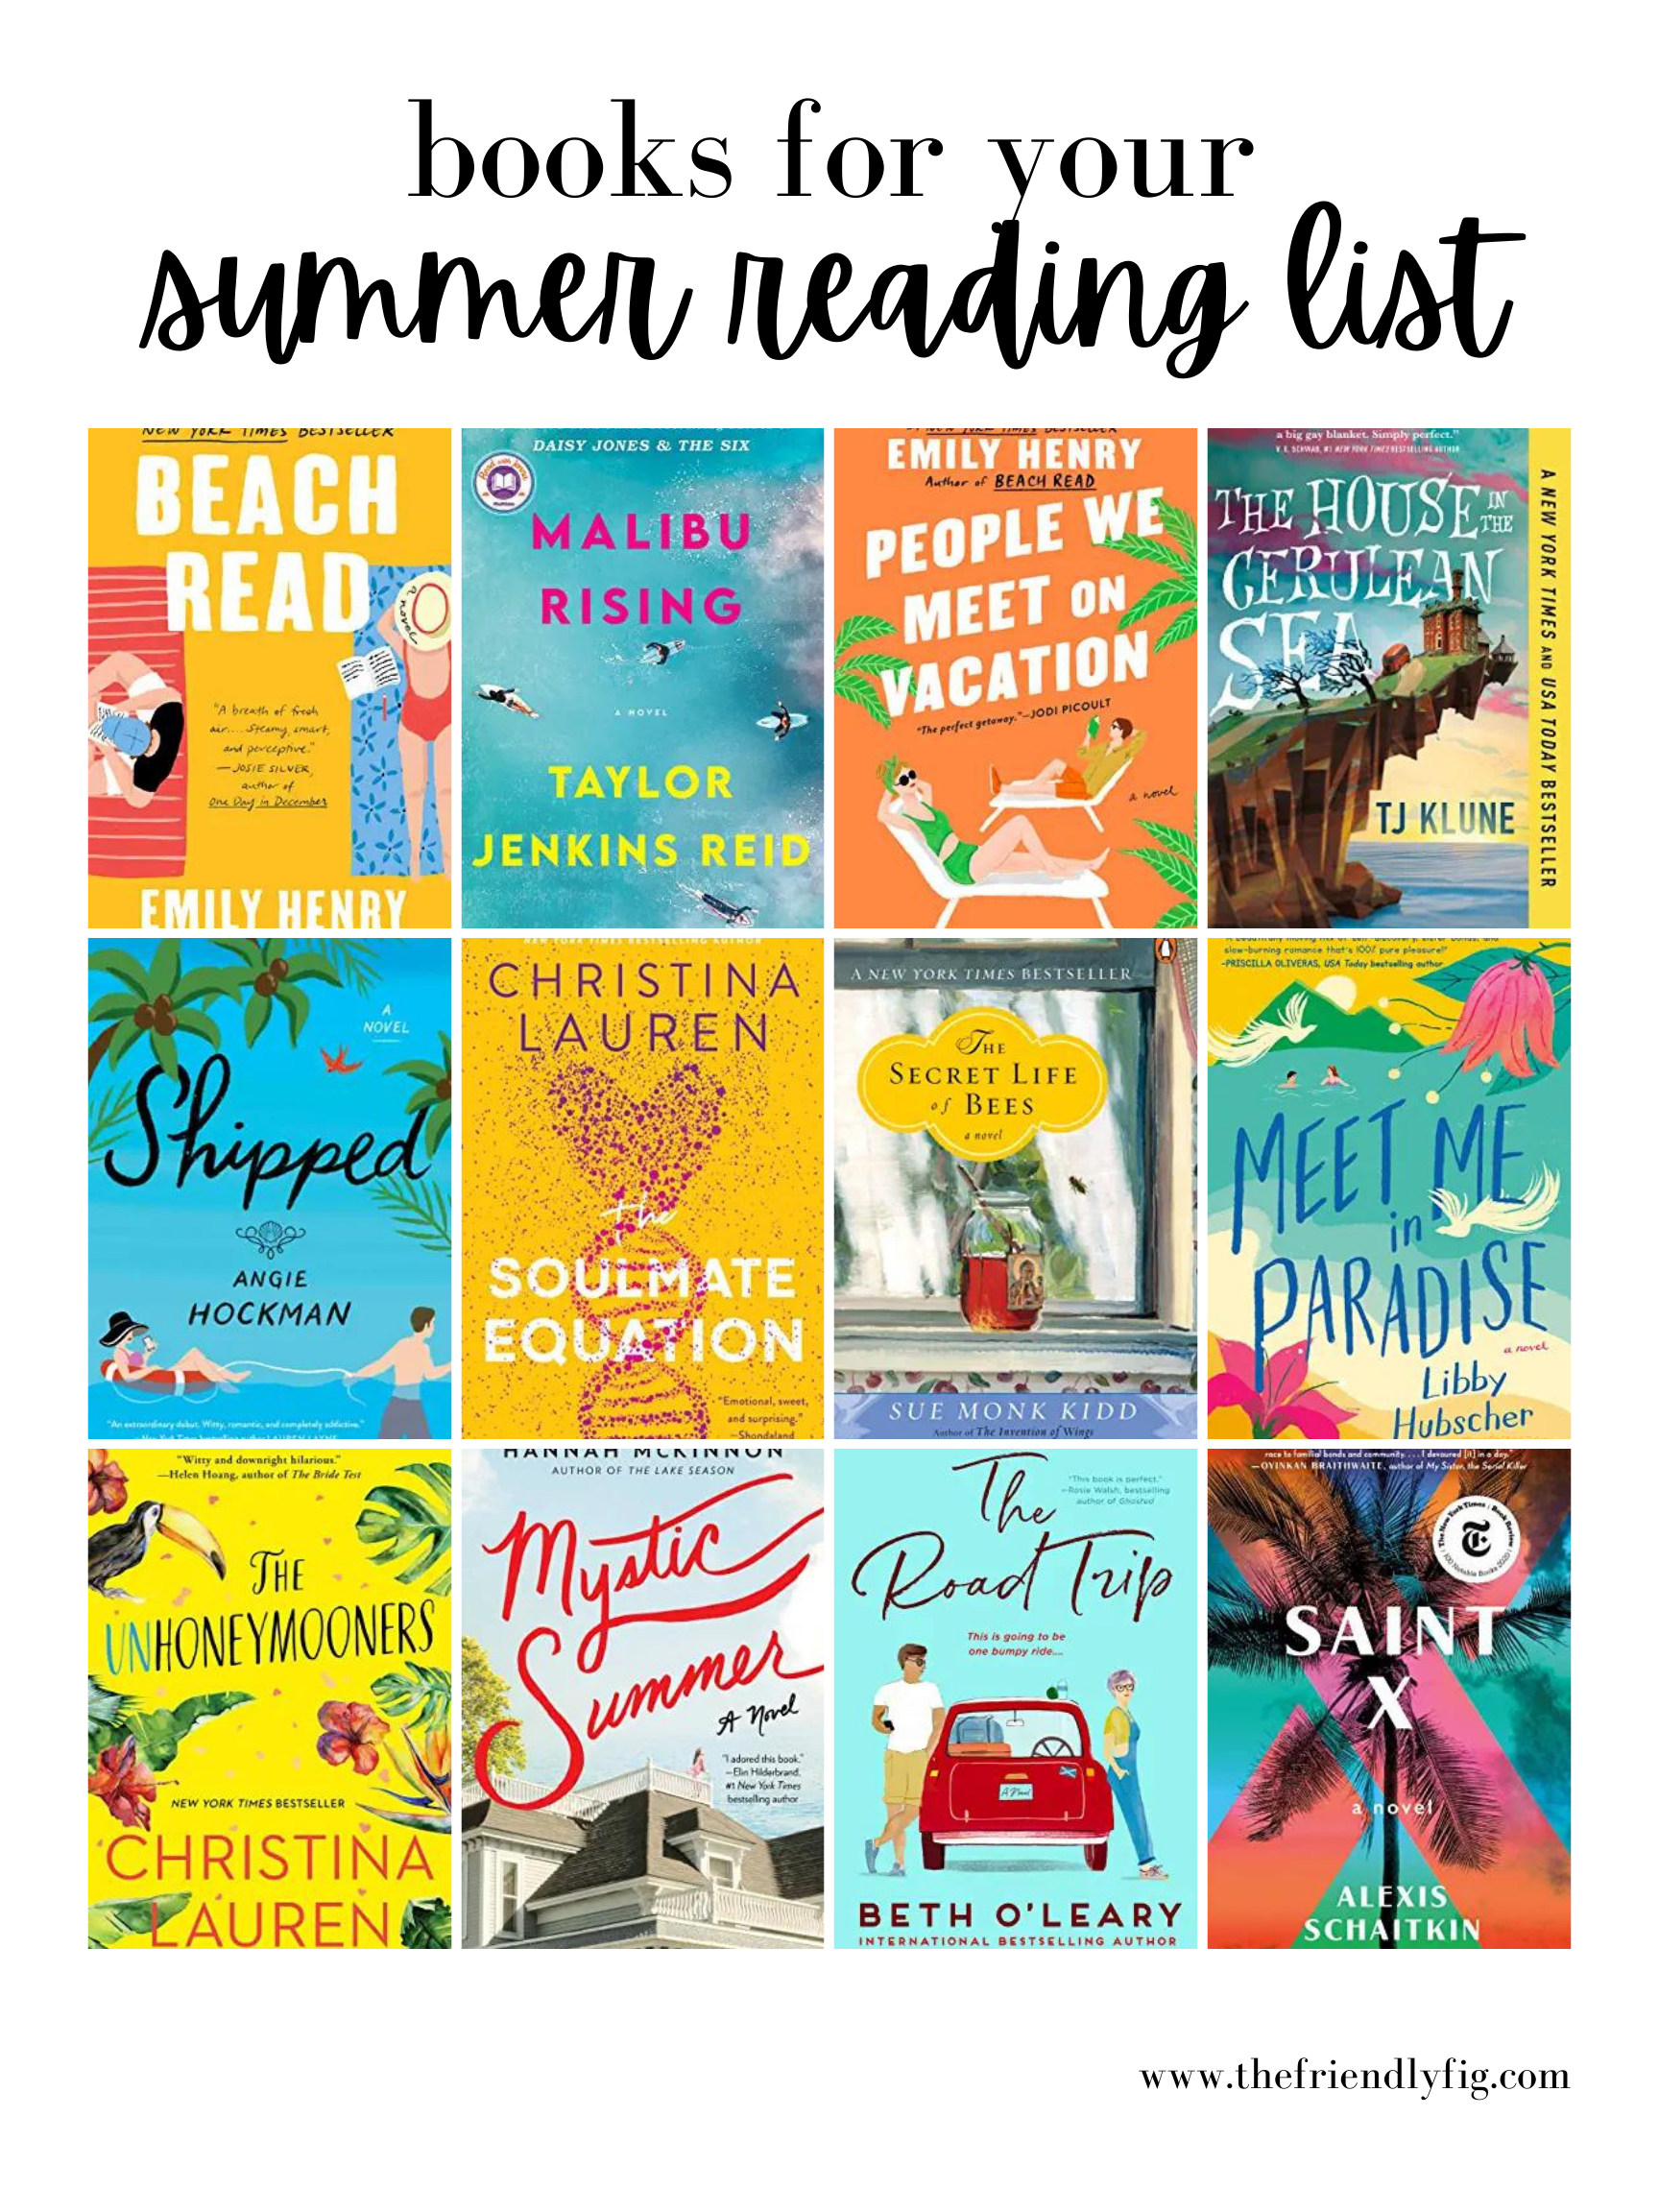 Summer Reading List & Recommendations